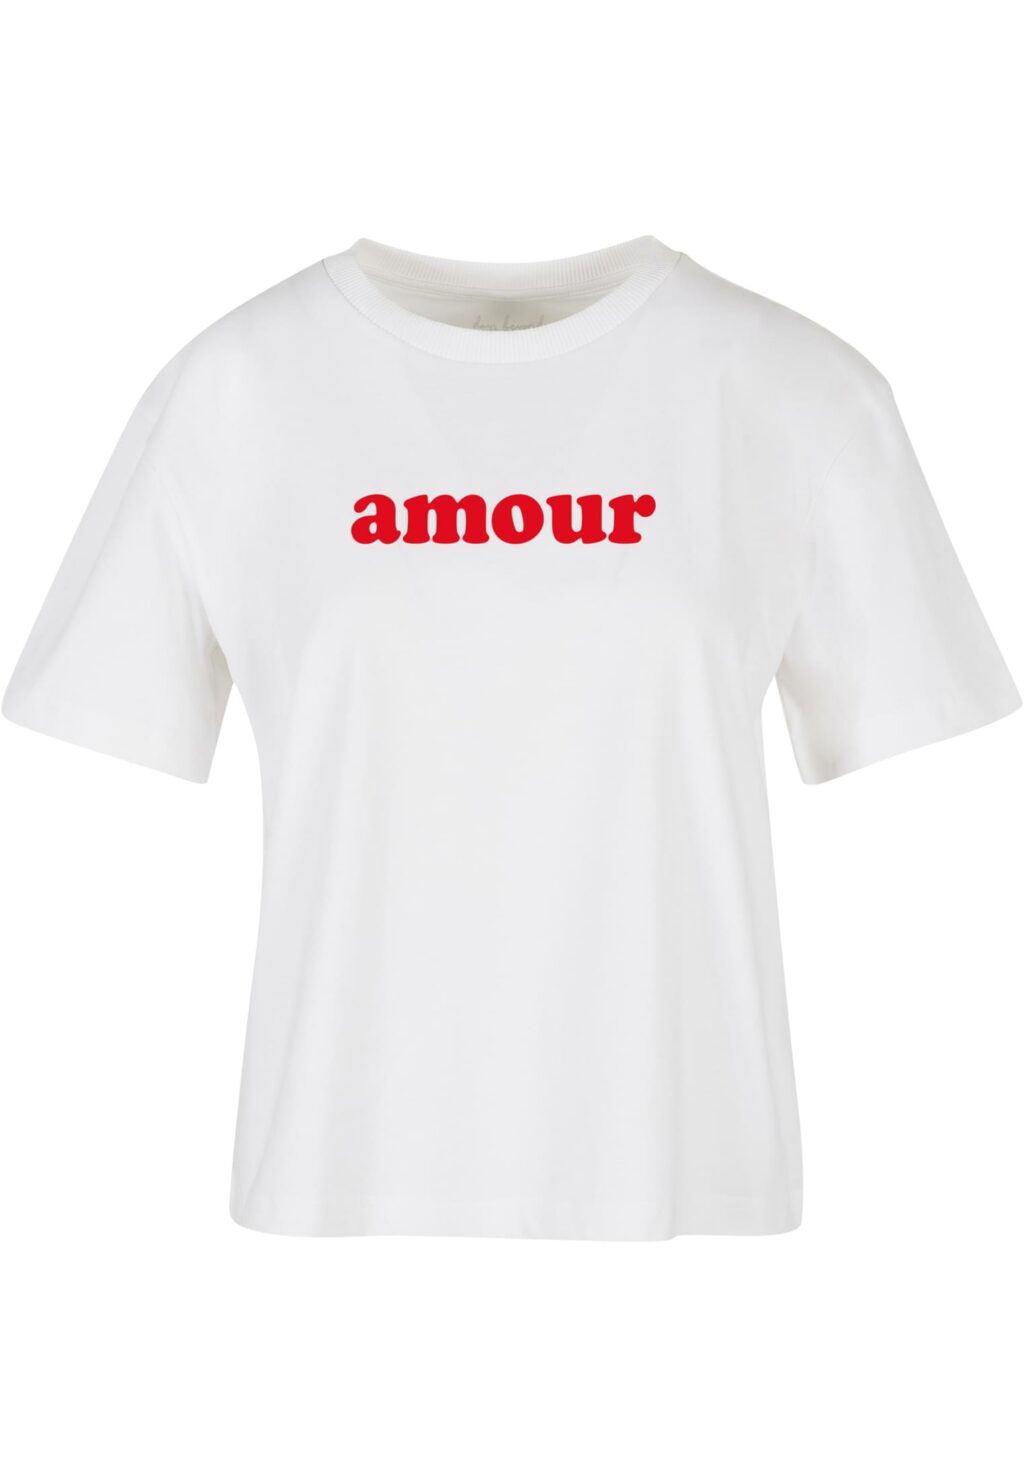 Amour Tee white BE011